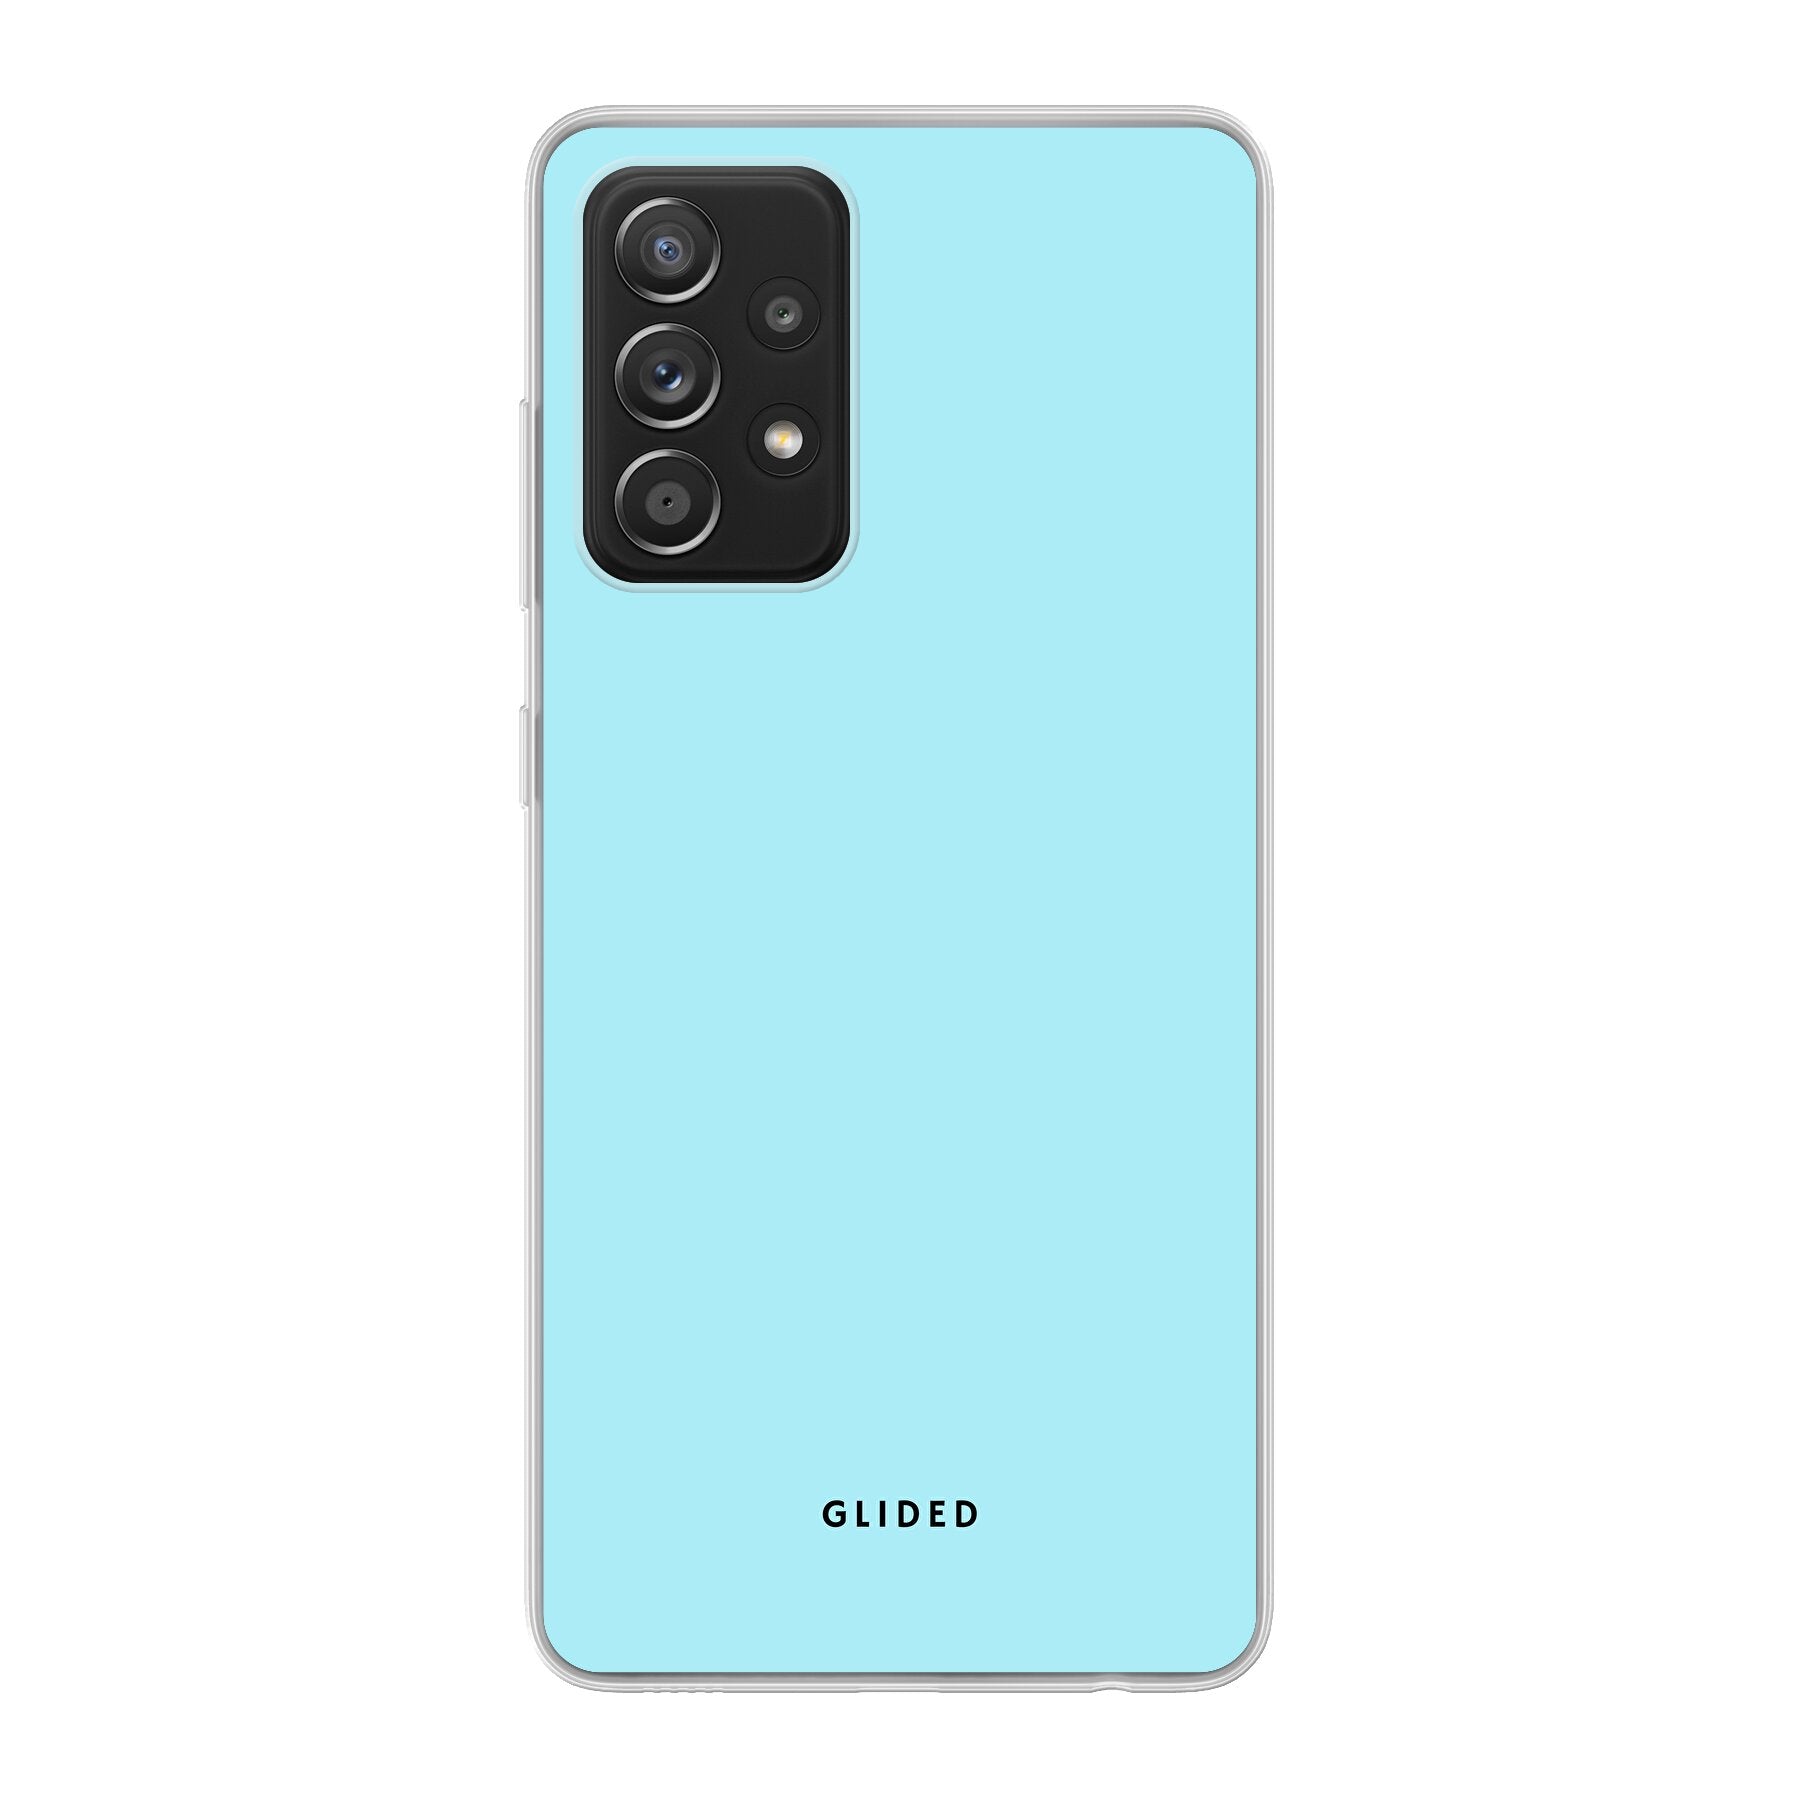 Turquoise Touch - Samsung Galaxy A52 / A52 5G / A52s 5G Handyhülle Hard Case